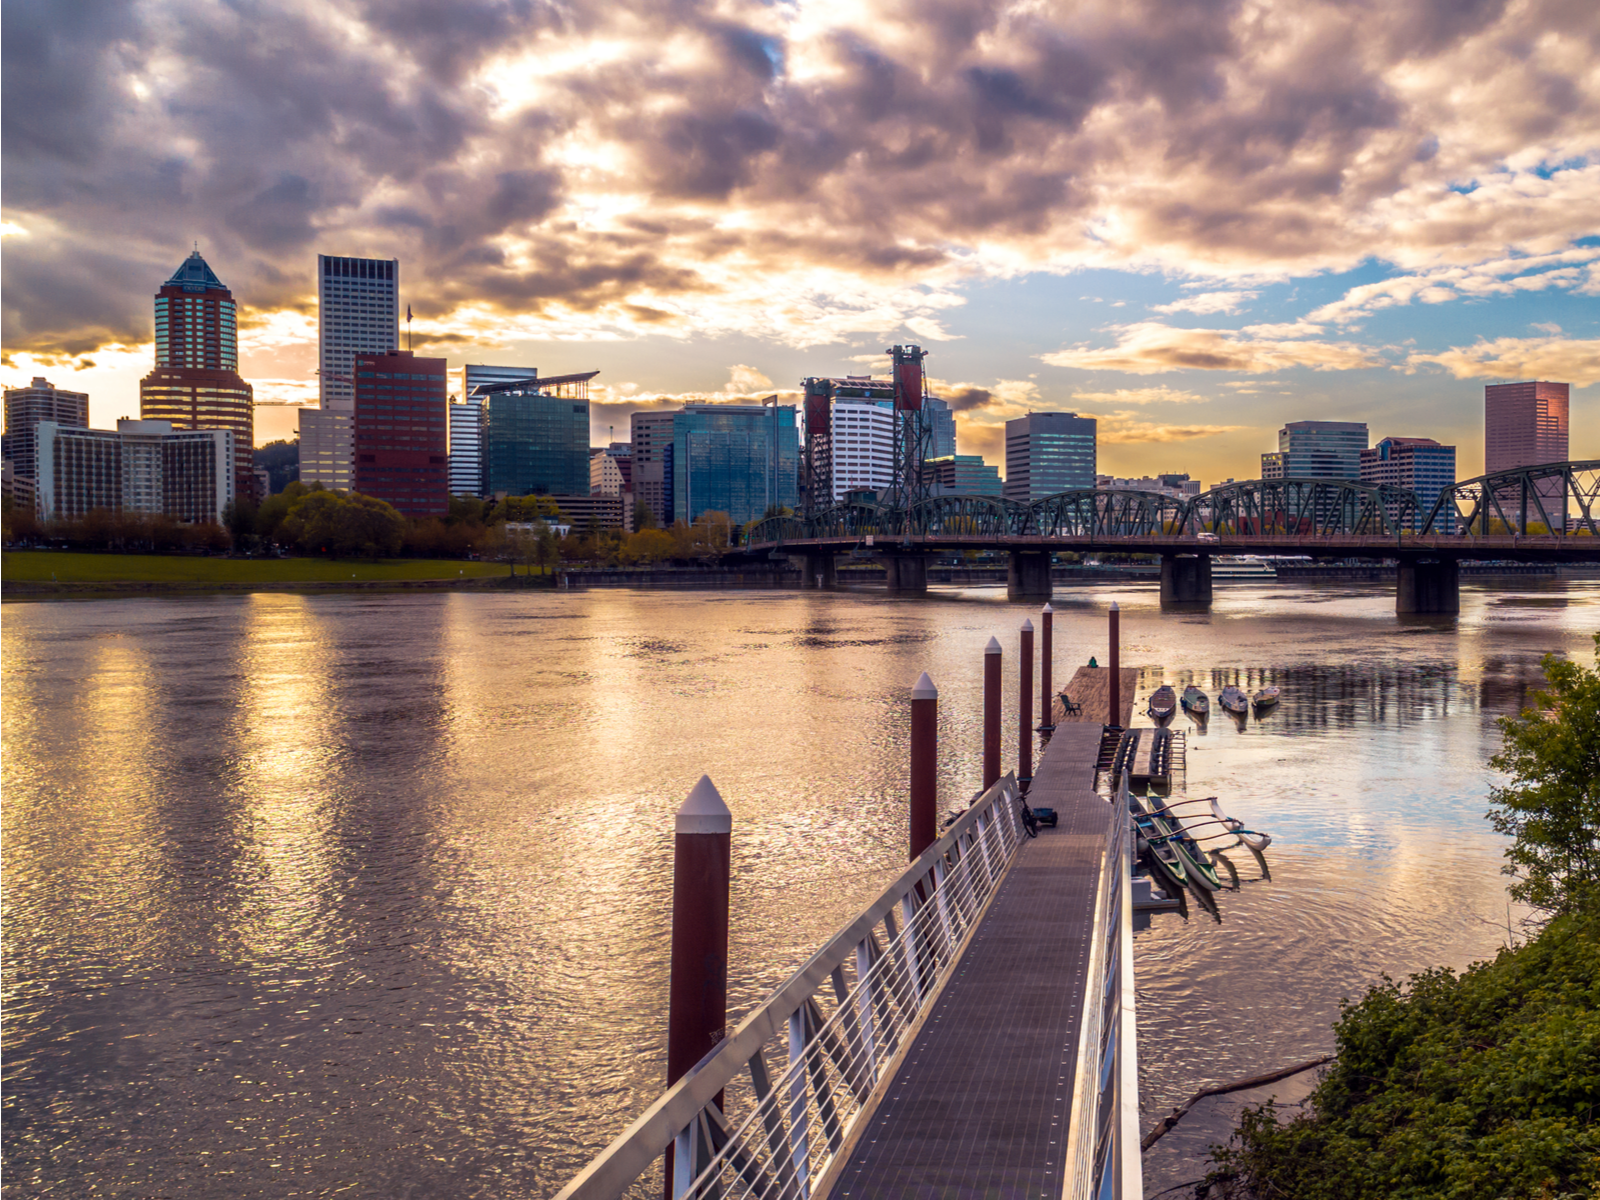 cityscape in the background of the shot at sunset for a post titled Is Portland Oregon safe